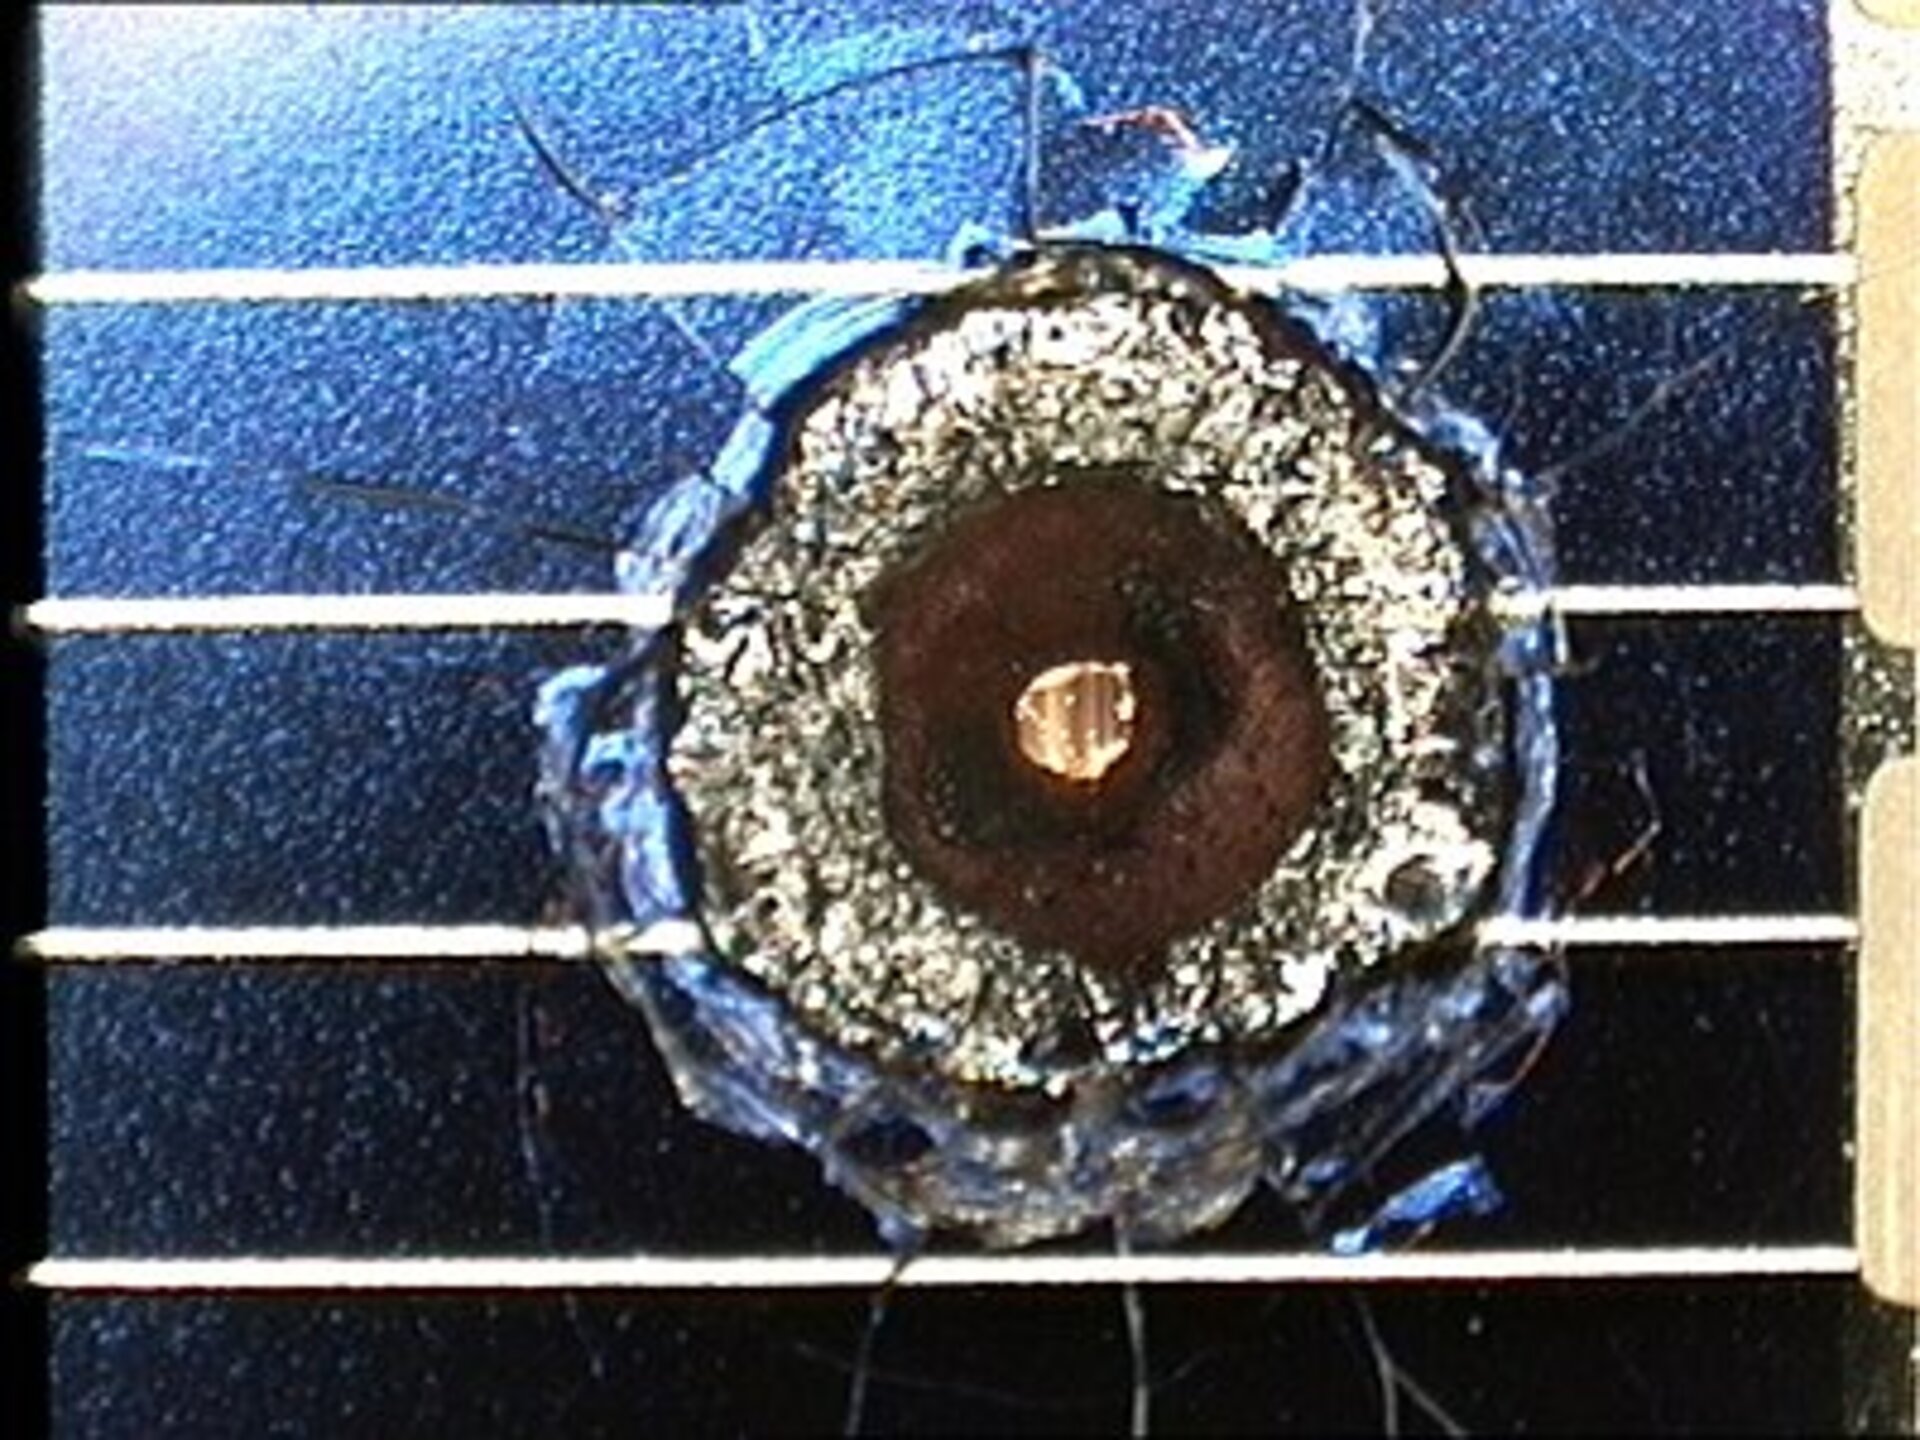 Impact crater (size 4 mm) on solar cell retrieved from space